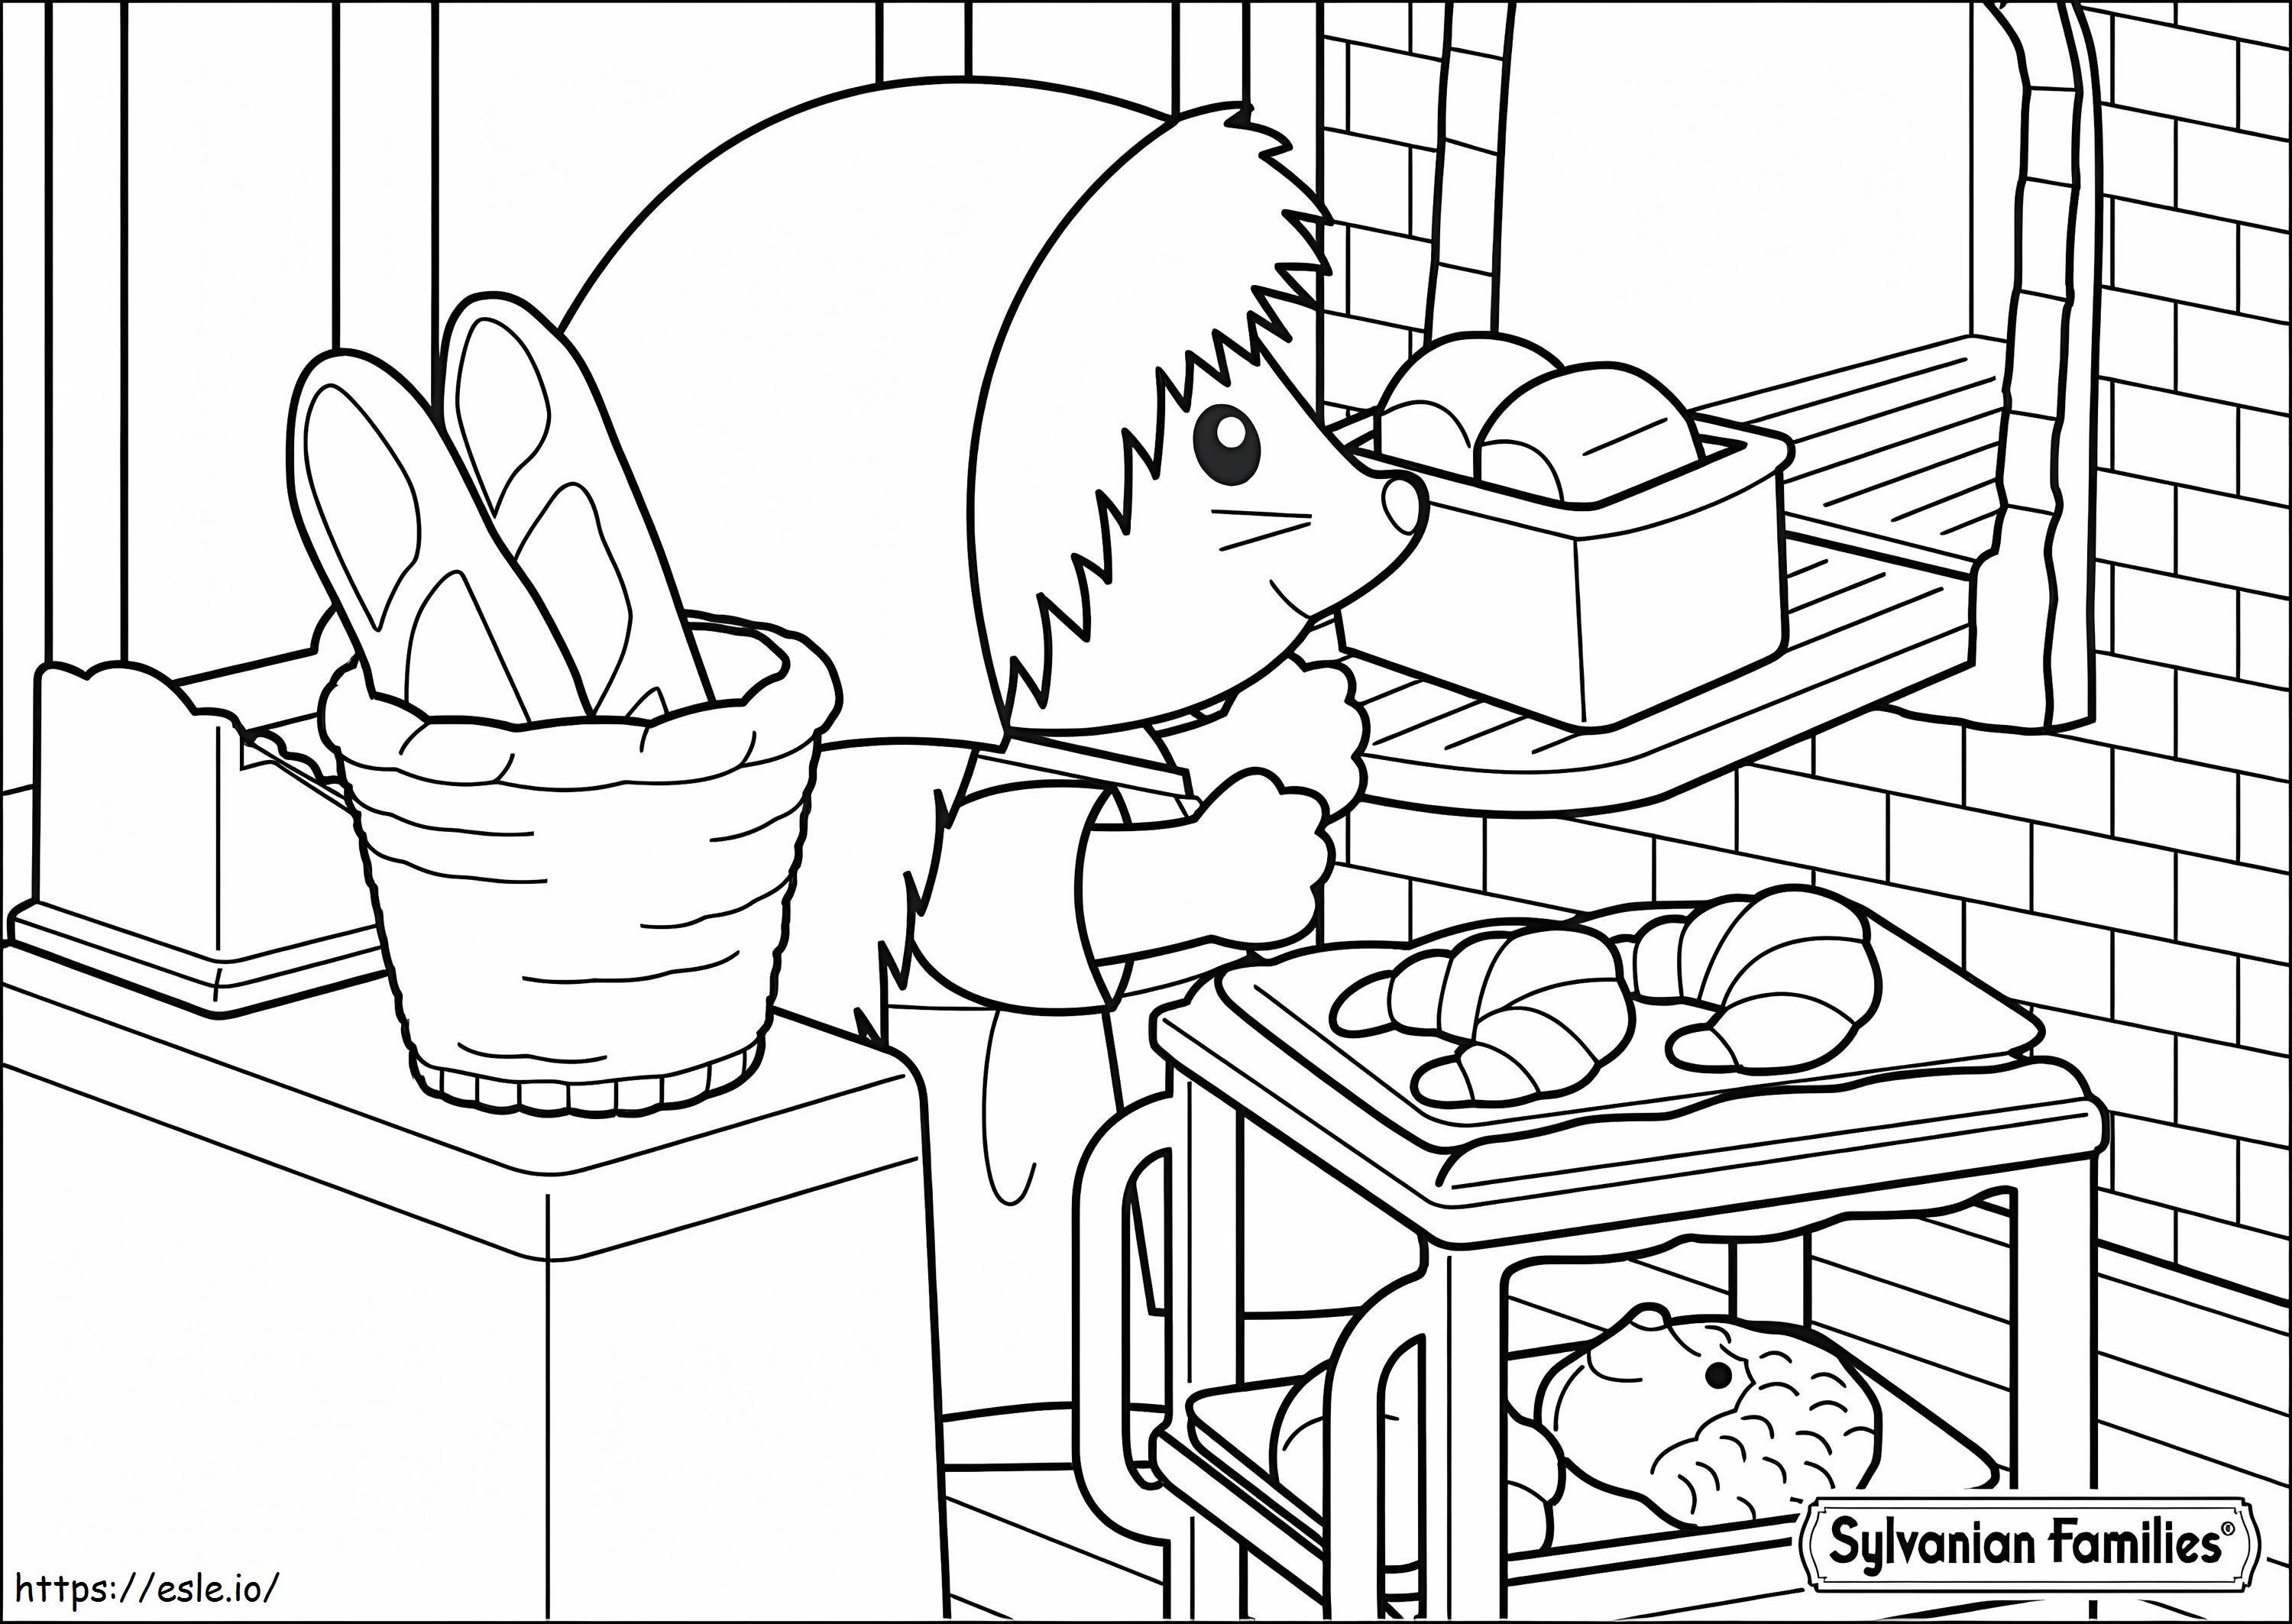 Sylvanian Families 1 coloring page